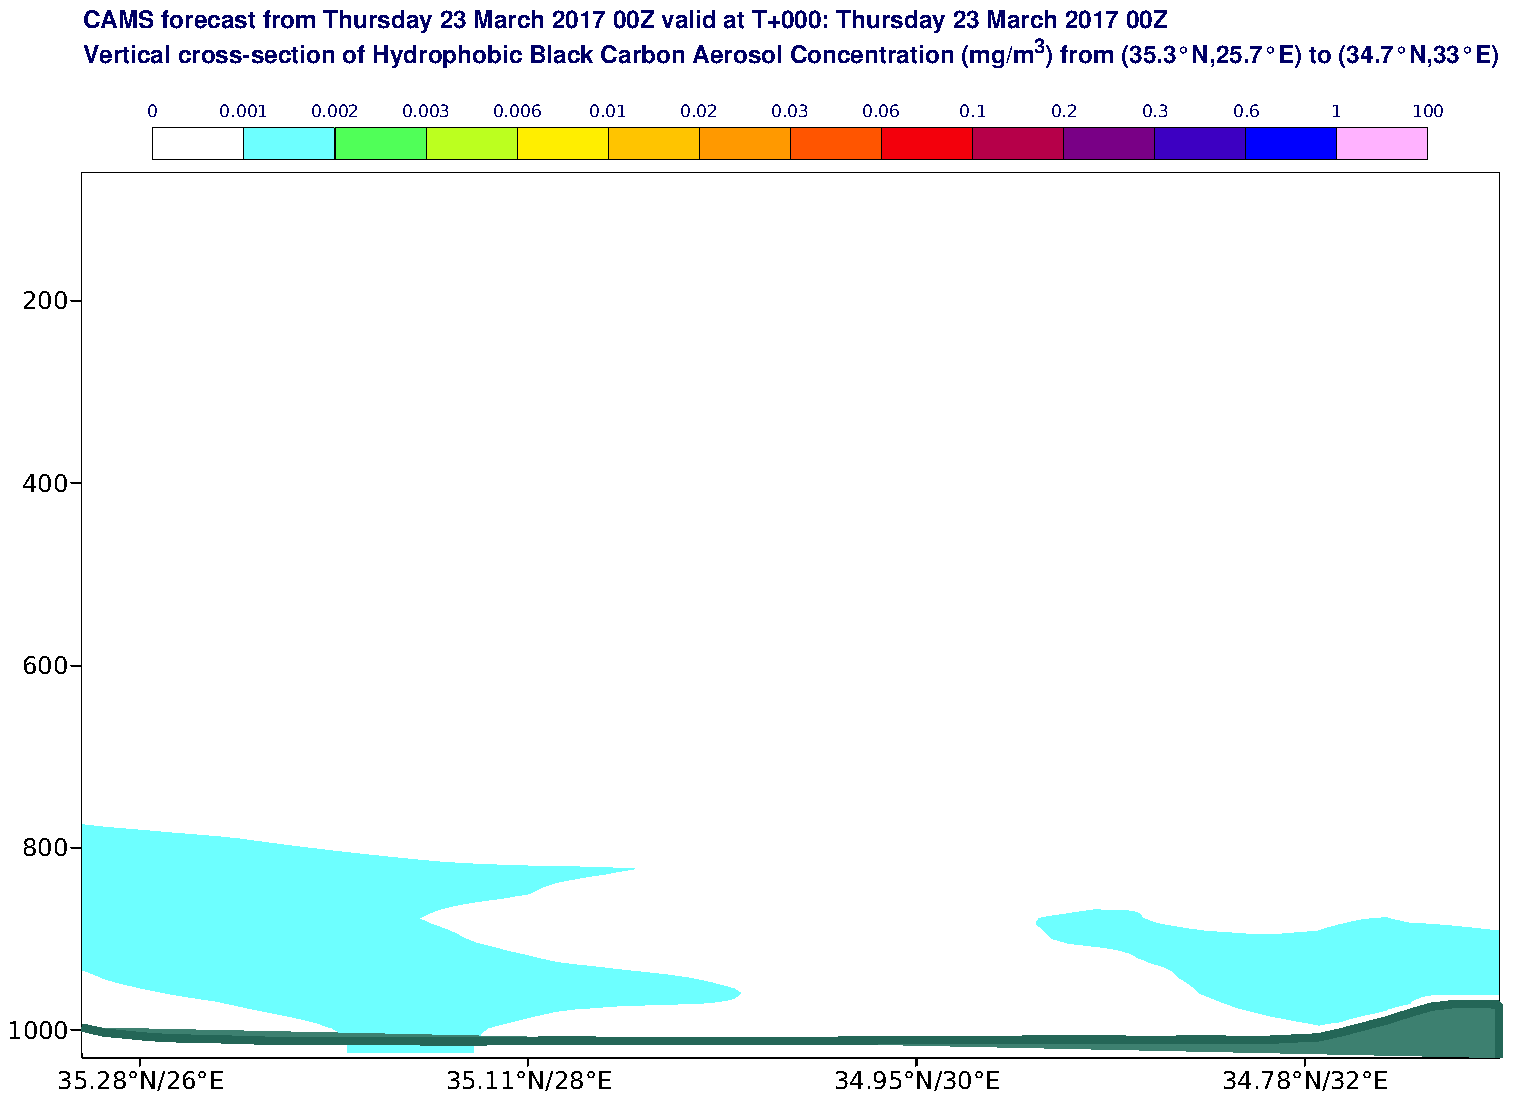 Vertical cross-section of Hydrophobic Black Carbon Aerosol Concentration (mg/m3) valid at T0 - 2017-03-23 00:00